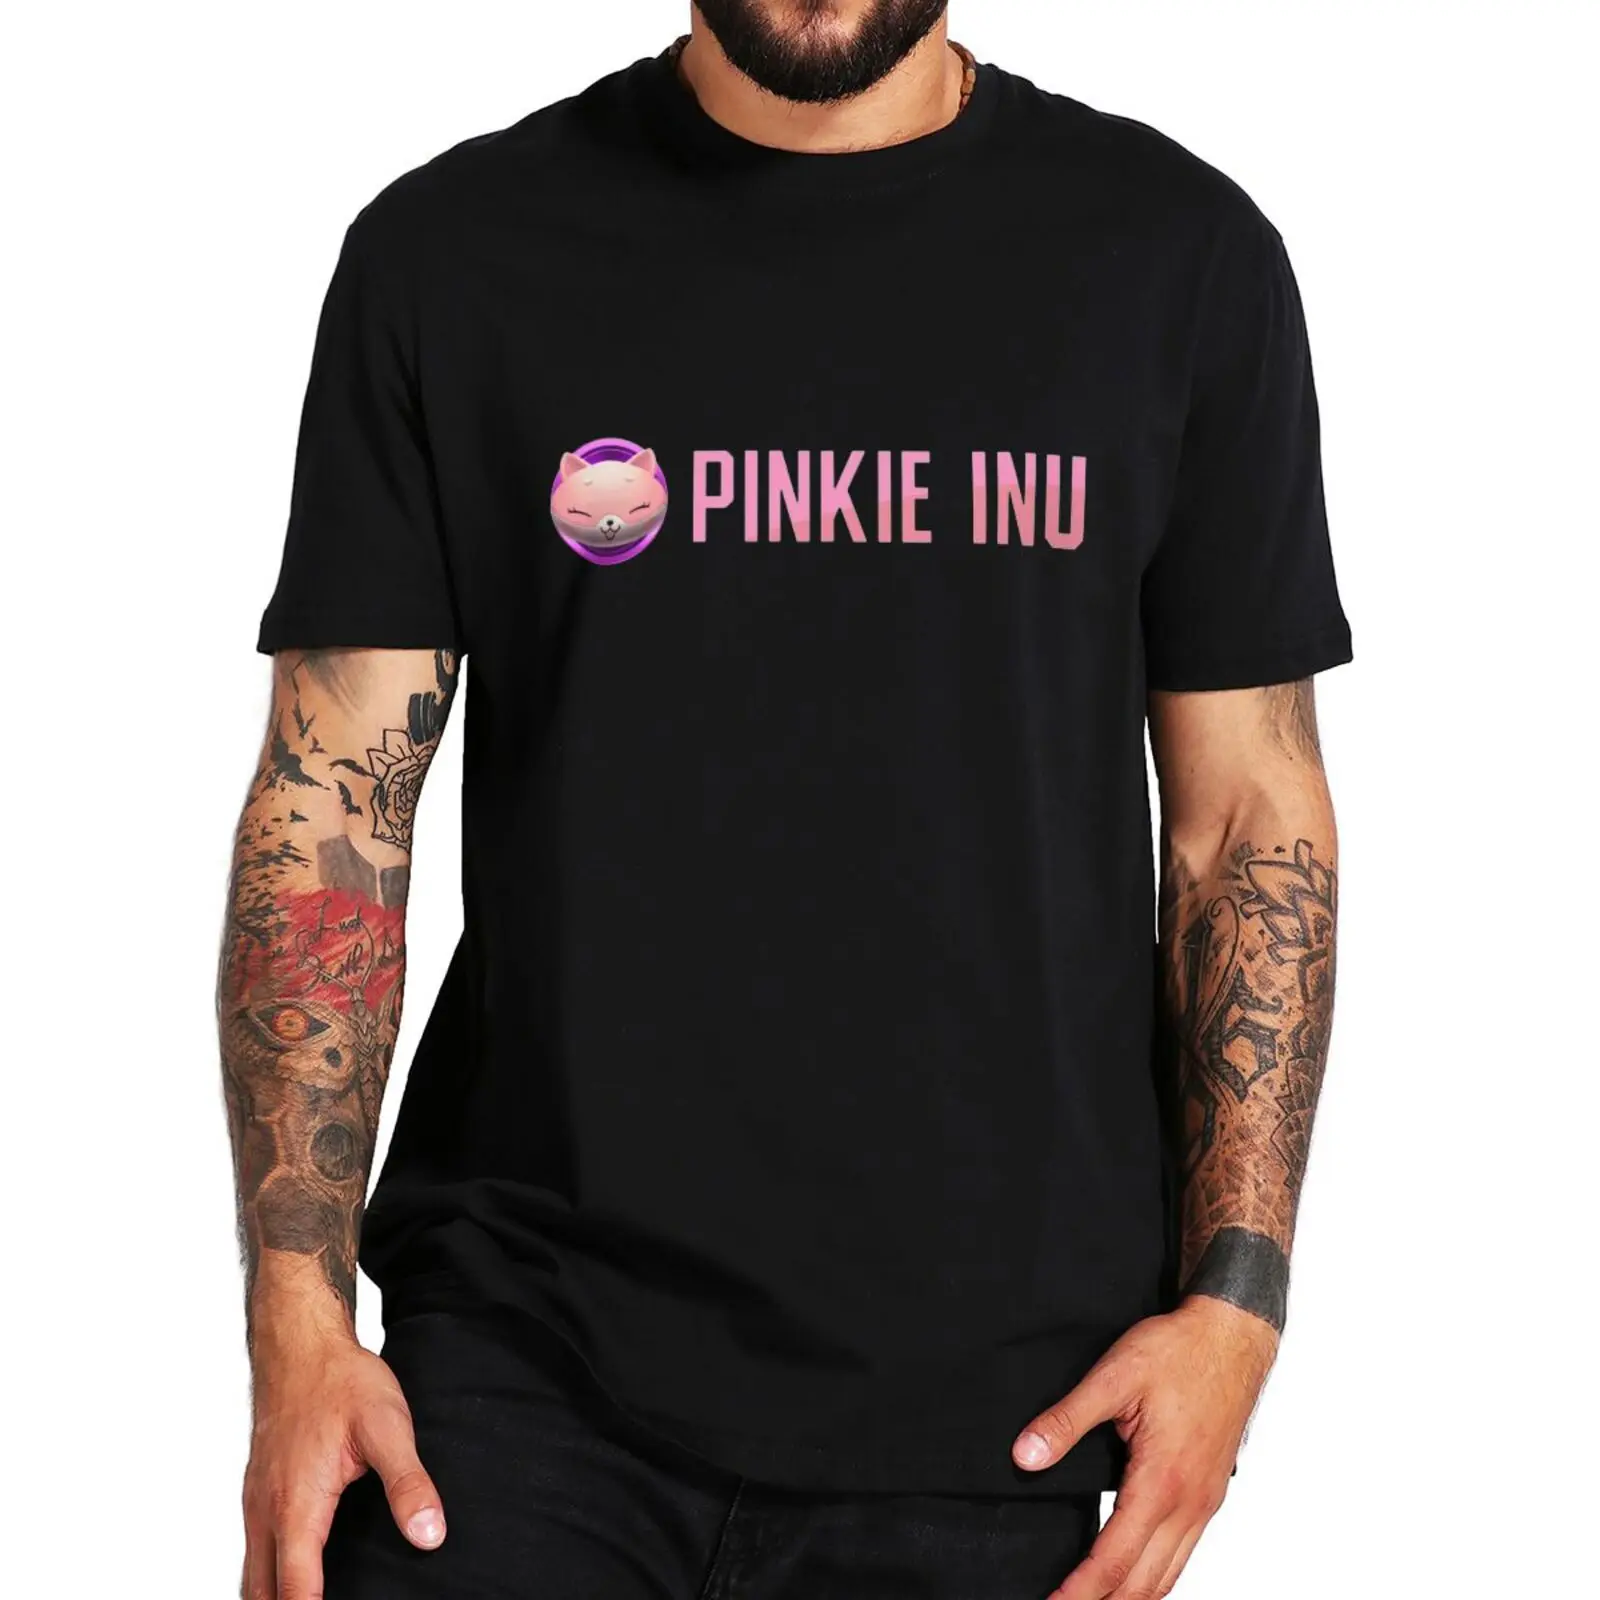 

Pinkie Inu Crypto T Shirt Cryptocurrency Token Meme Coin Geek Gift Tee Tops Casual 100% Cotton Unisex Oversized T-shirts